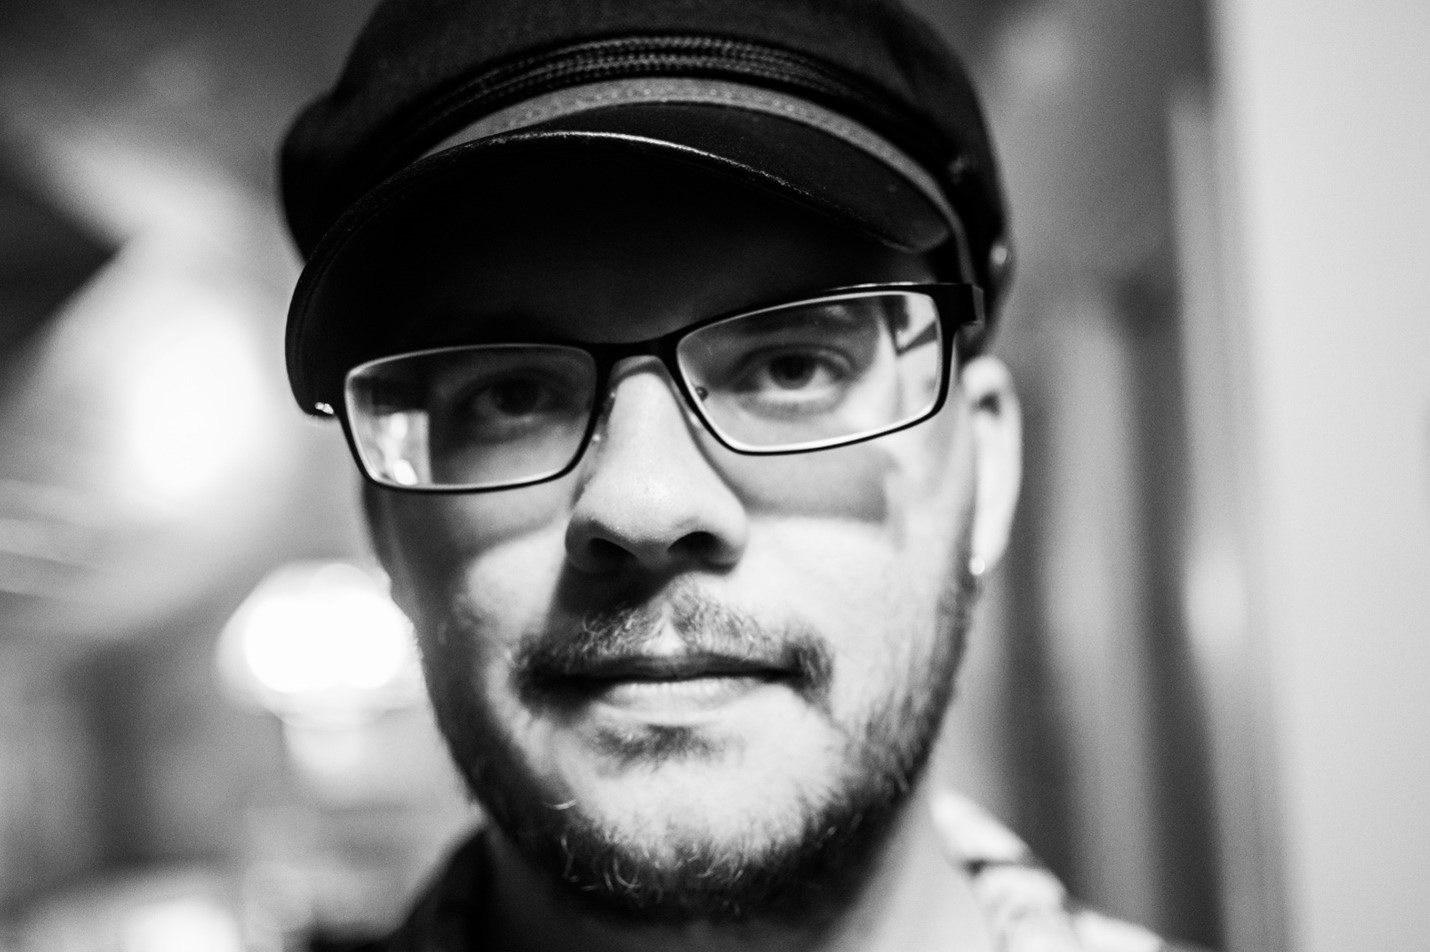 A headshot of a man wearing glasses and a hat.